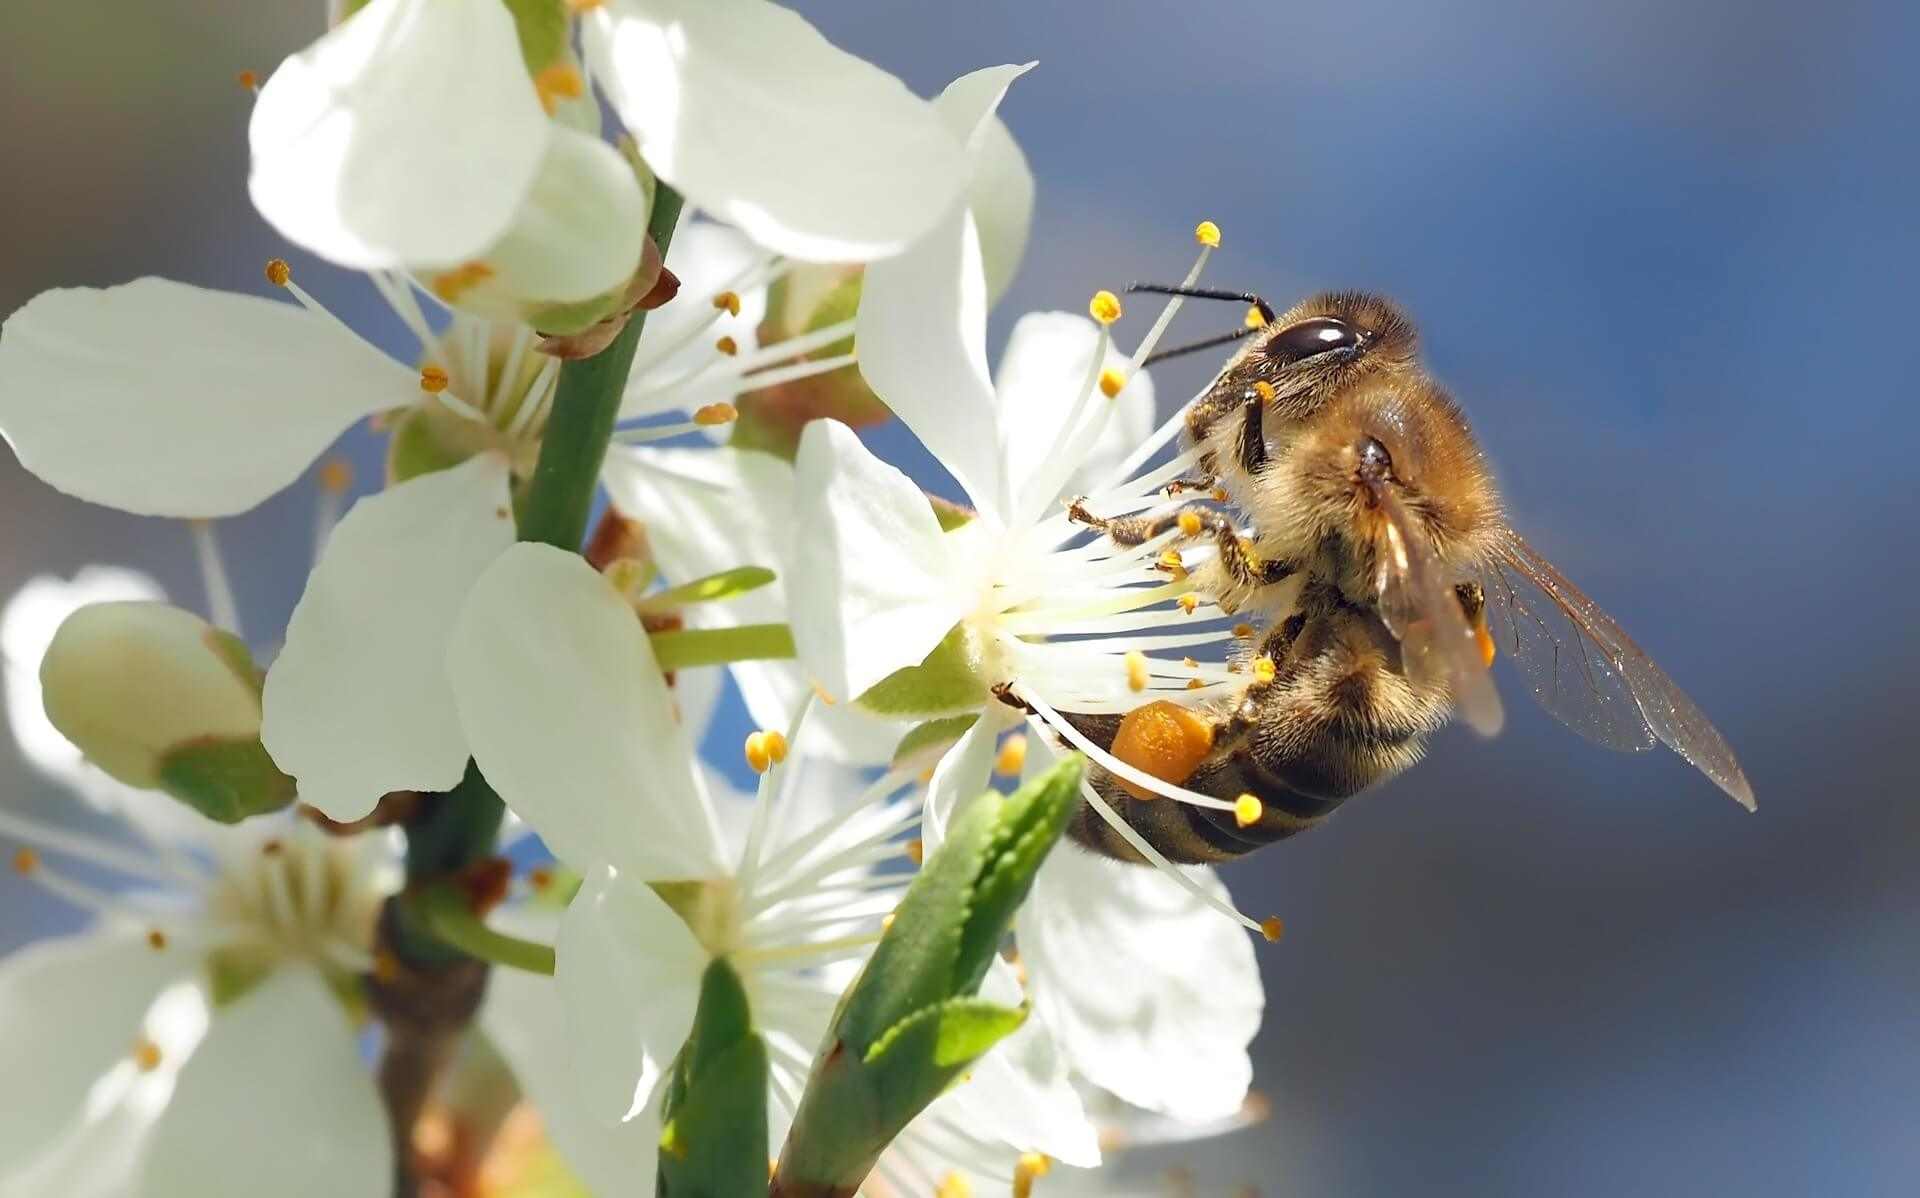 Tips for Avoiding Bees and Preventing Bee Stings in 2021